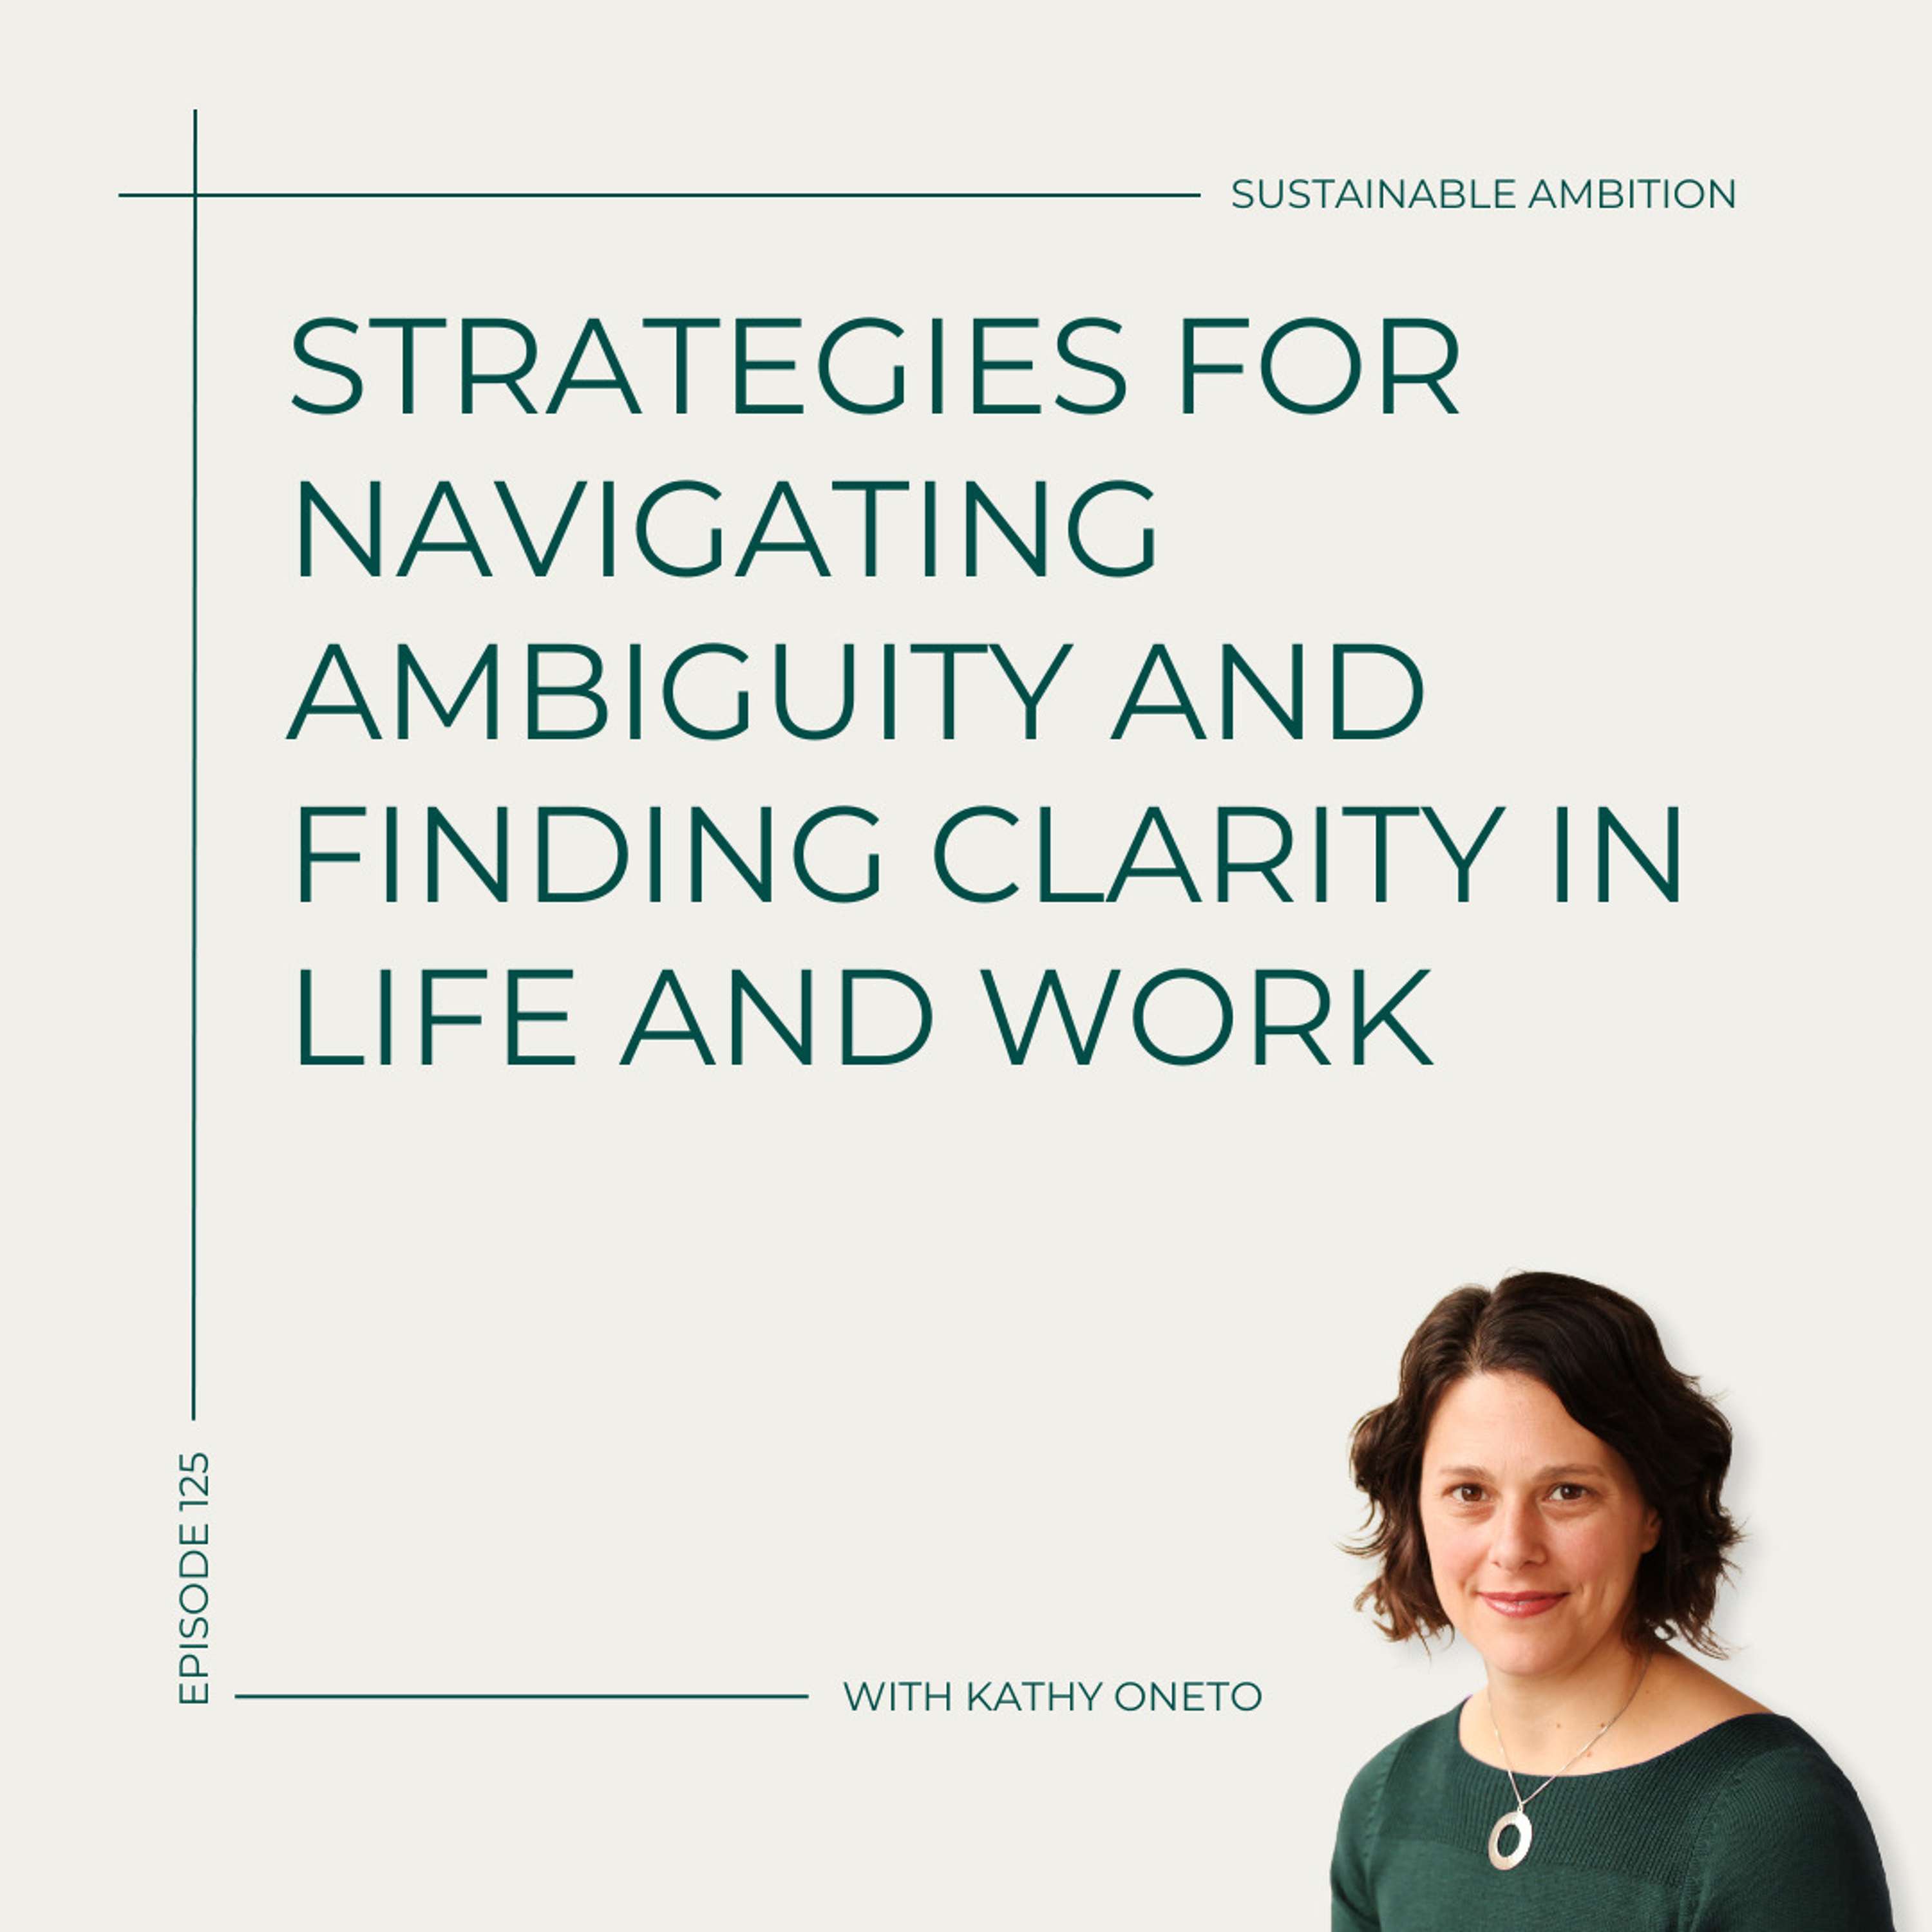 125. Strategies for Navigating Ambiguity and Finding Clarity in Life and Work